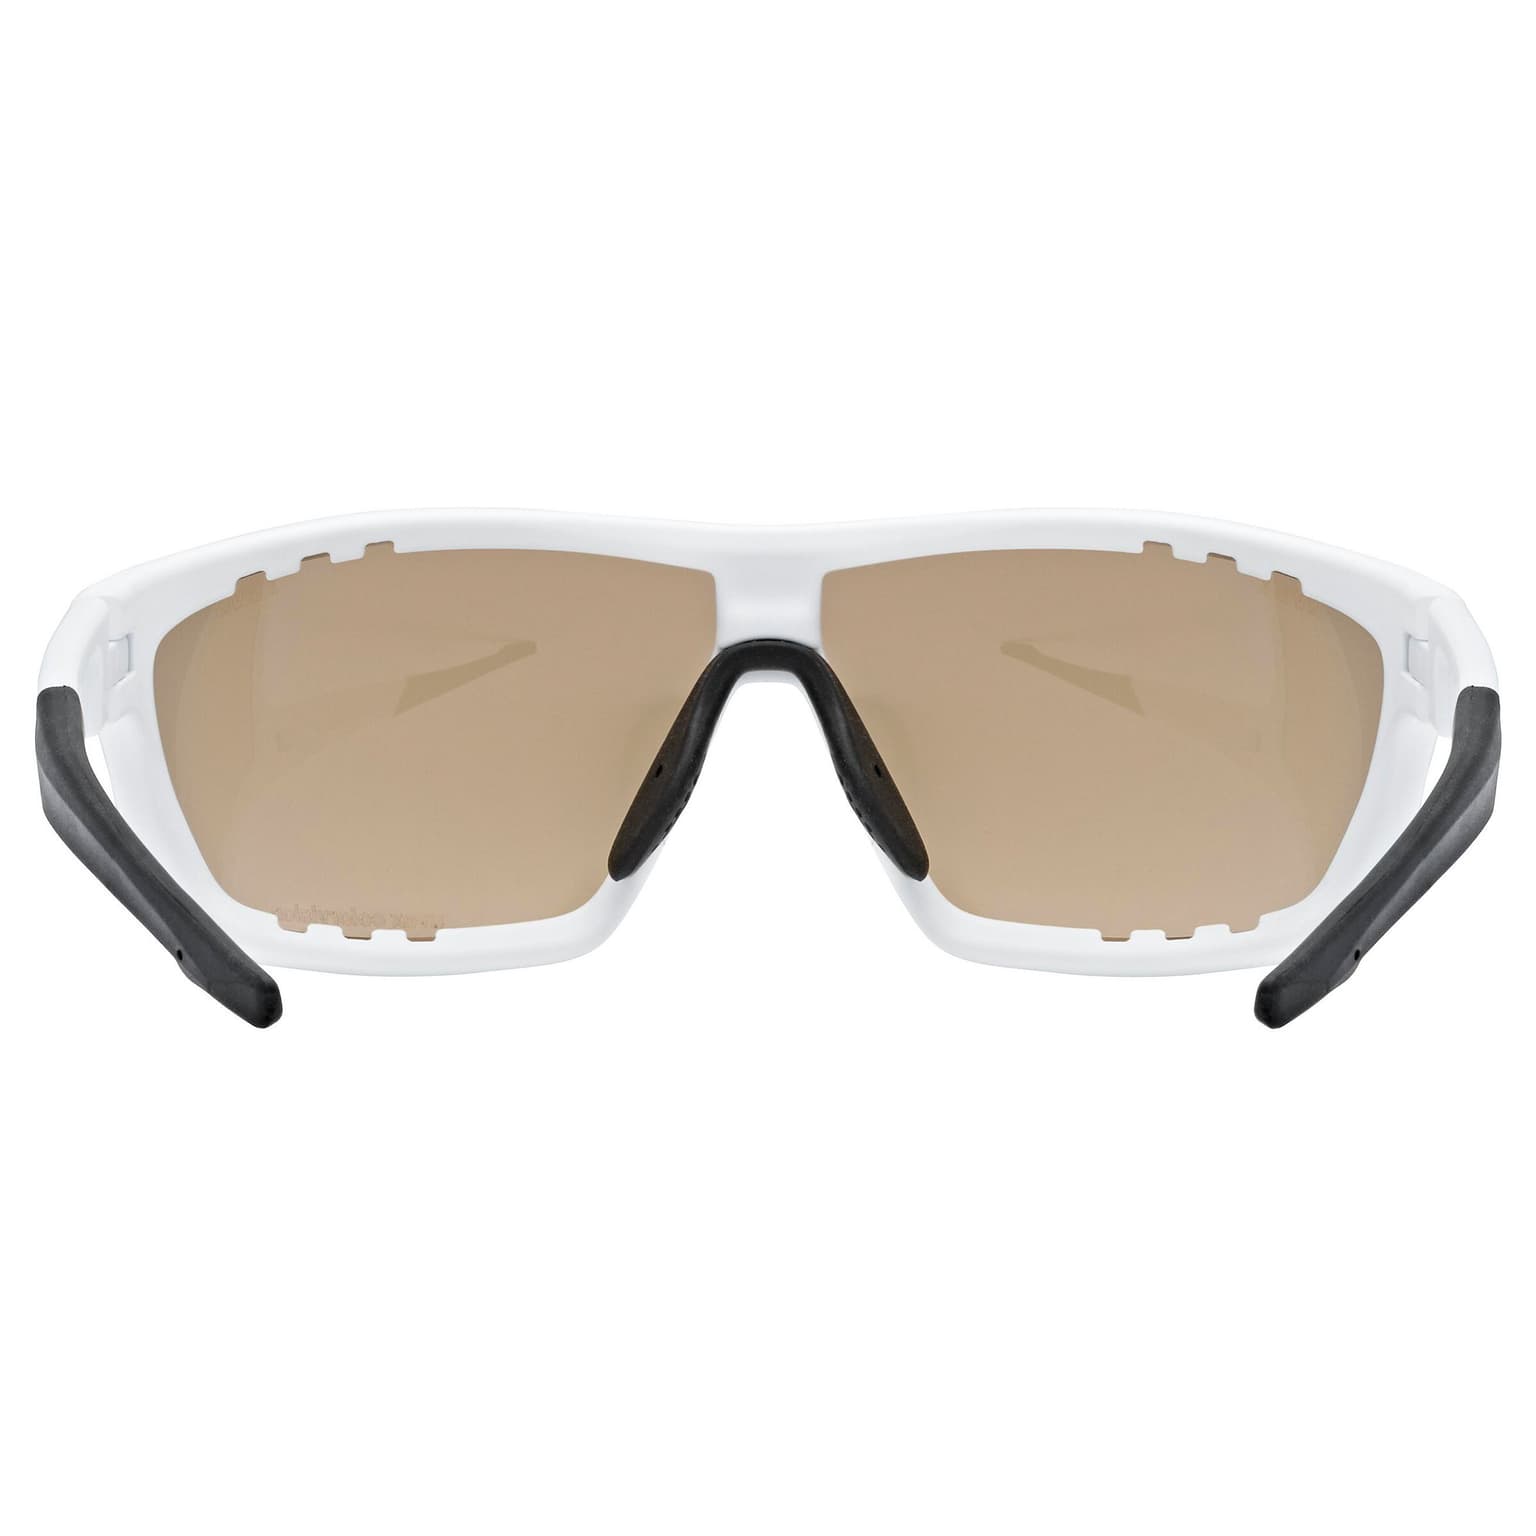 Uvex Uvex Colorvision Sportbrille weiss 5